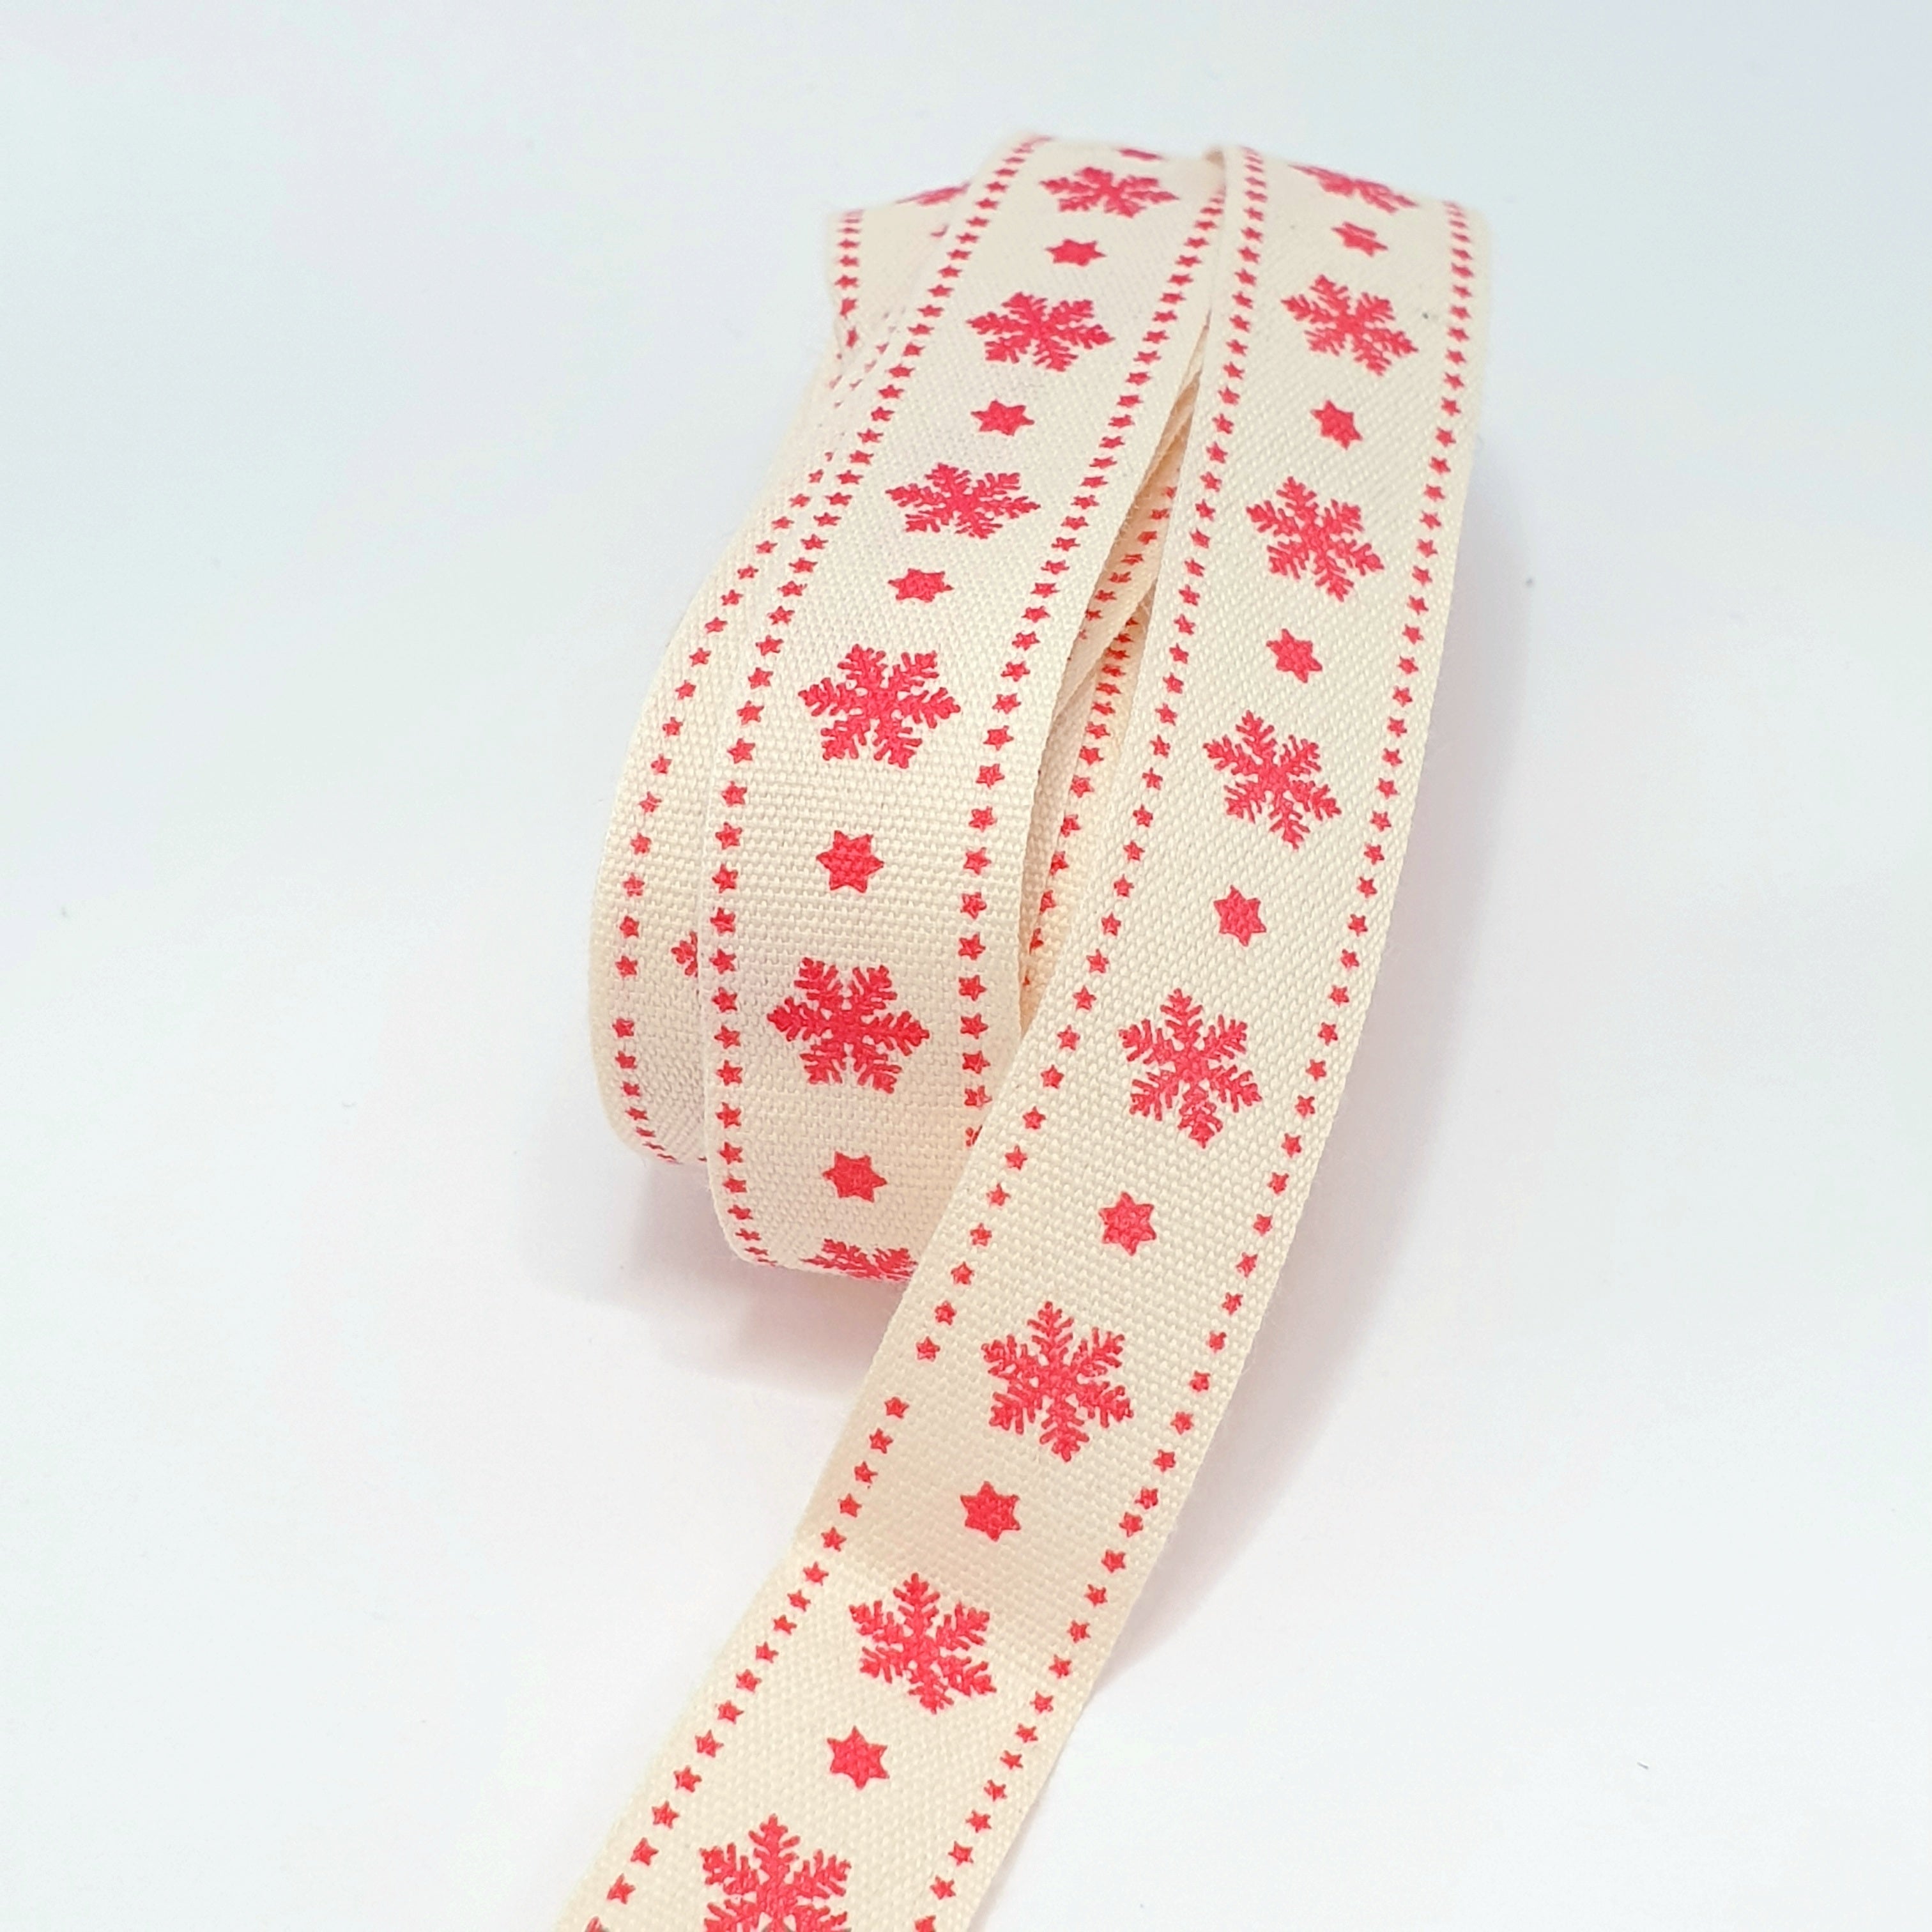 MajorCrafts 4.5m 5yds - 15mm wide Red Snowflake Christmas Cotton Fabric Ribbon